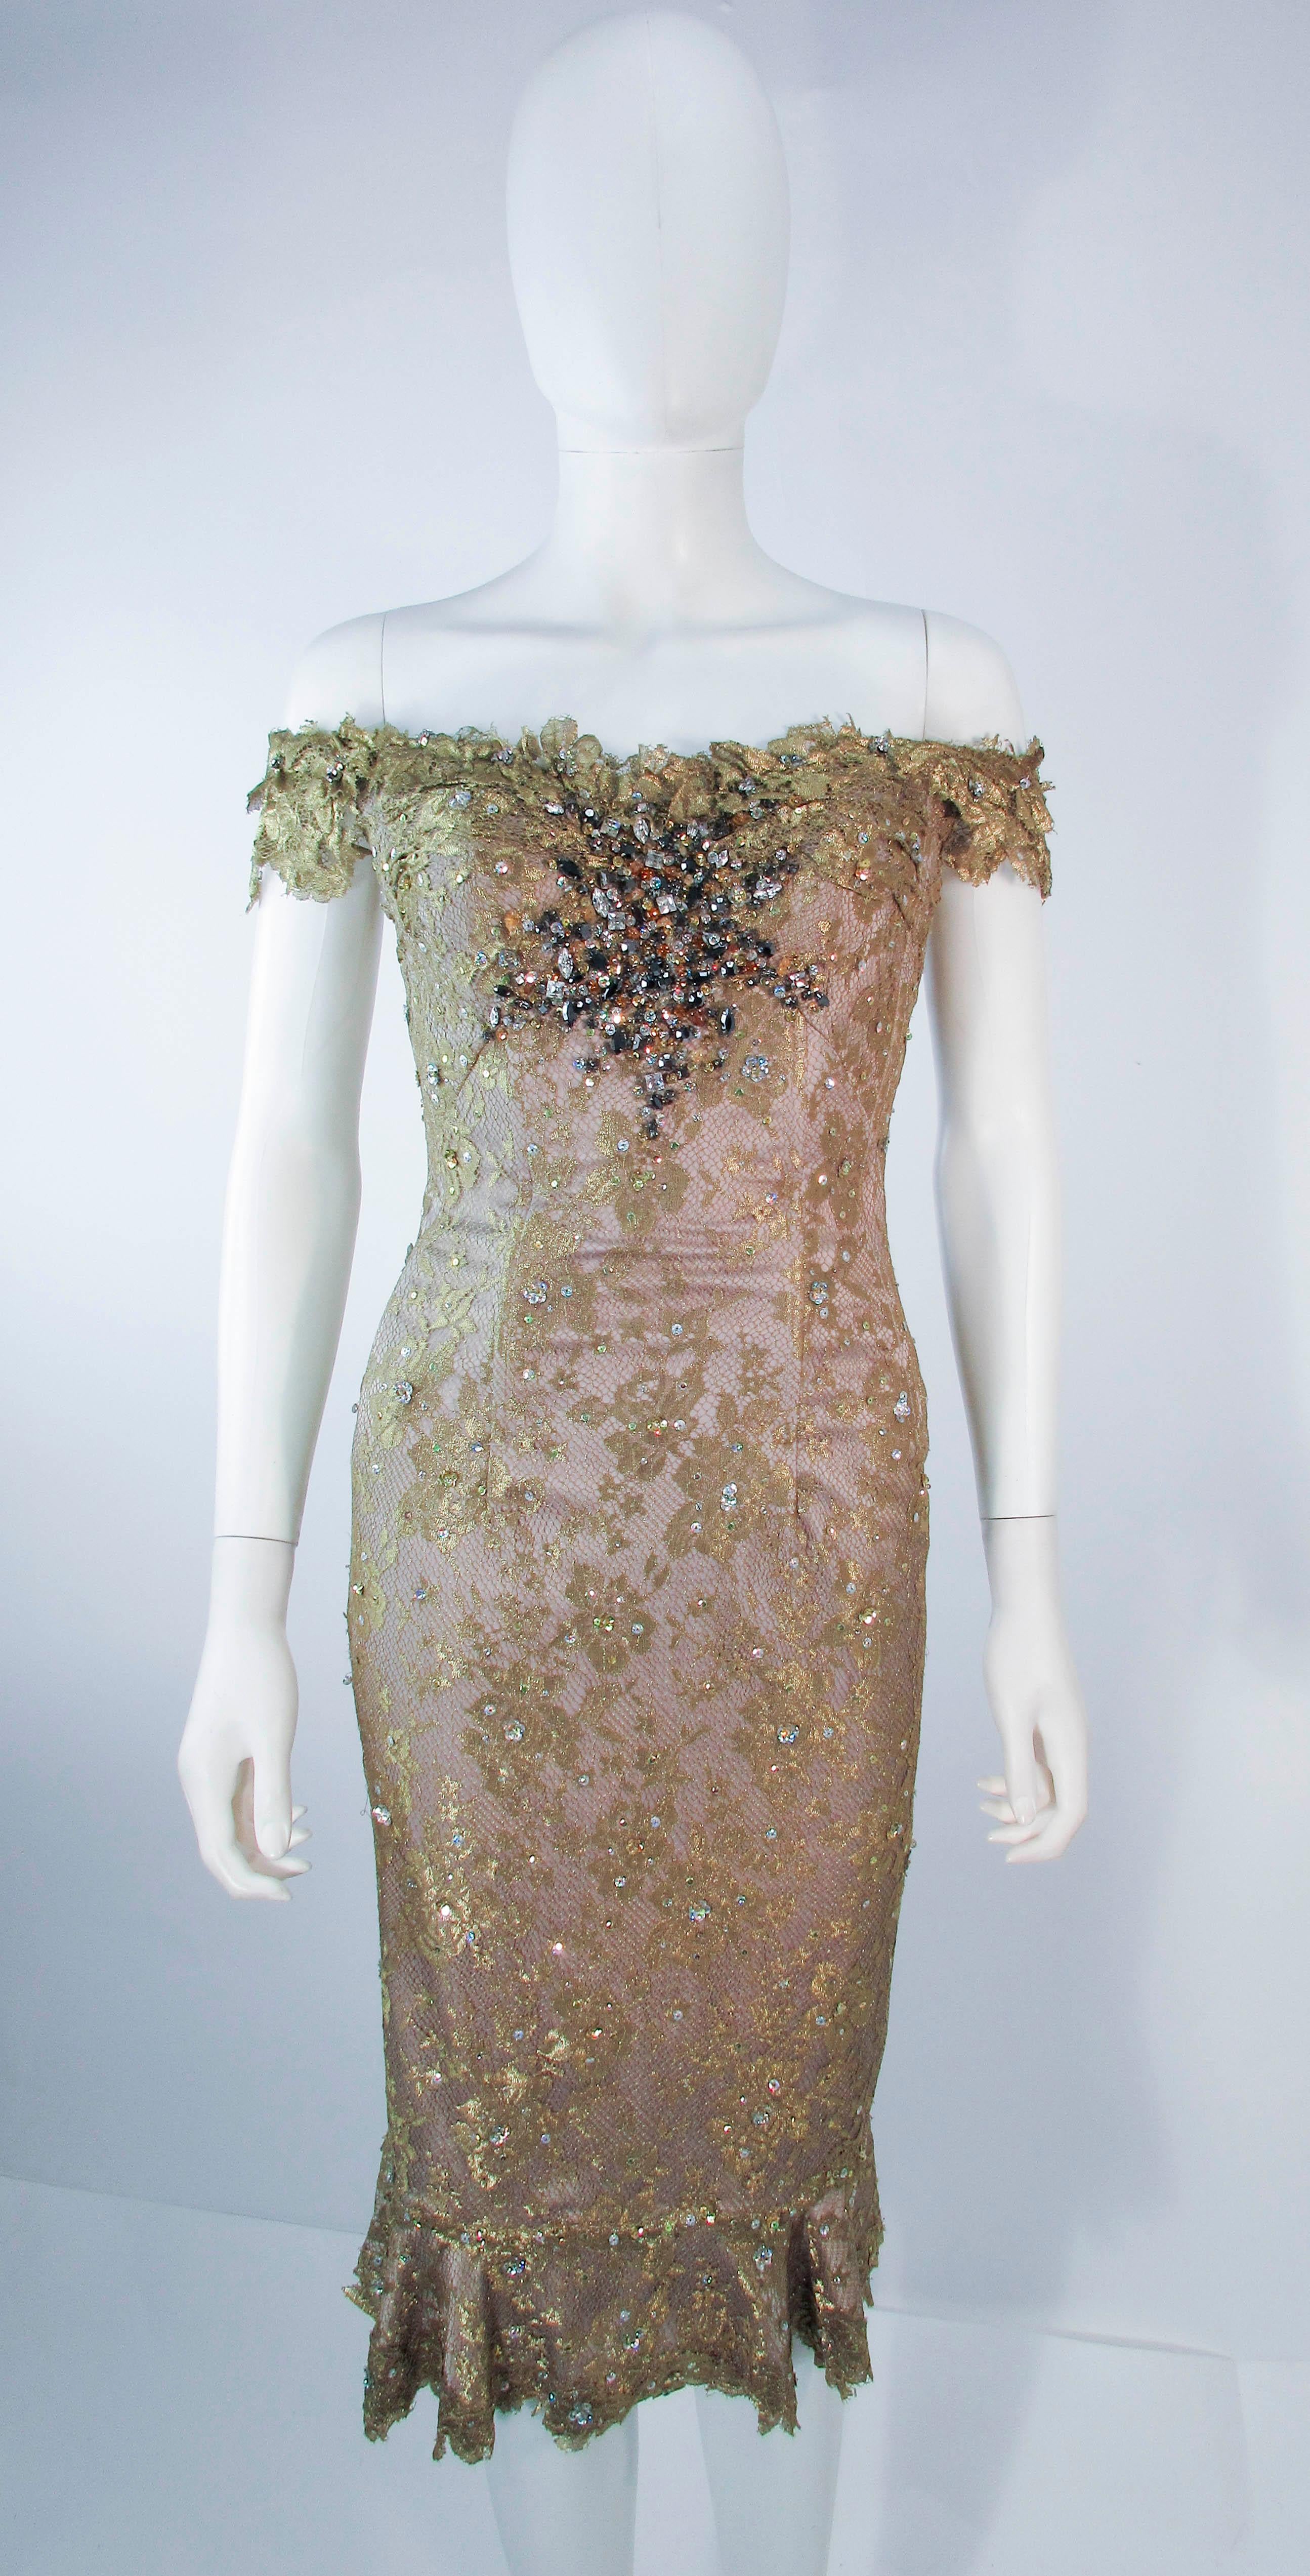 This is a Madalay cocktail dress, it is composed of a gold metallic with a beaded and sequin applique. Features an off the shoulder style with corset boning and a center back zipper closure. In excellent pre-owned condition, shows some signs of wear